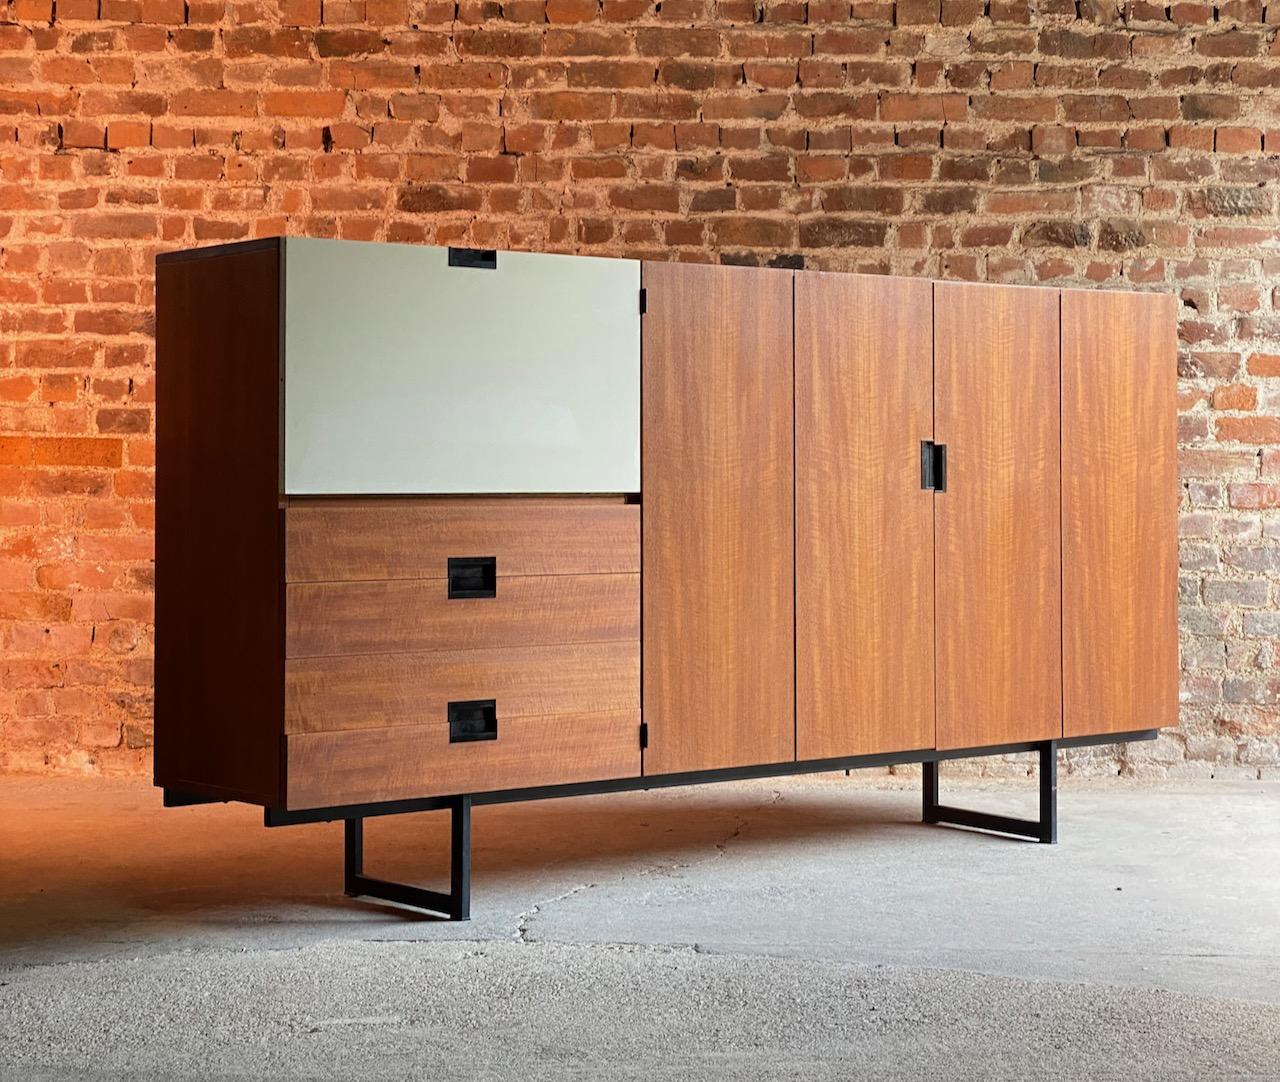 Cees Braakman Japanese Series high board for Pastoe Netherlands 1958

Cees Braakman Japanese series high board by UMS Pastoe, Netherlands circa 1958 the teak body having one white laminate fall front door over four pullout / pull-out drawers with